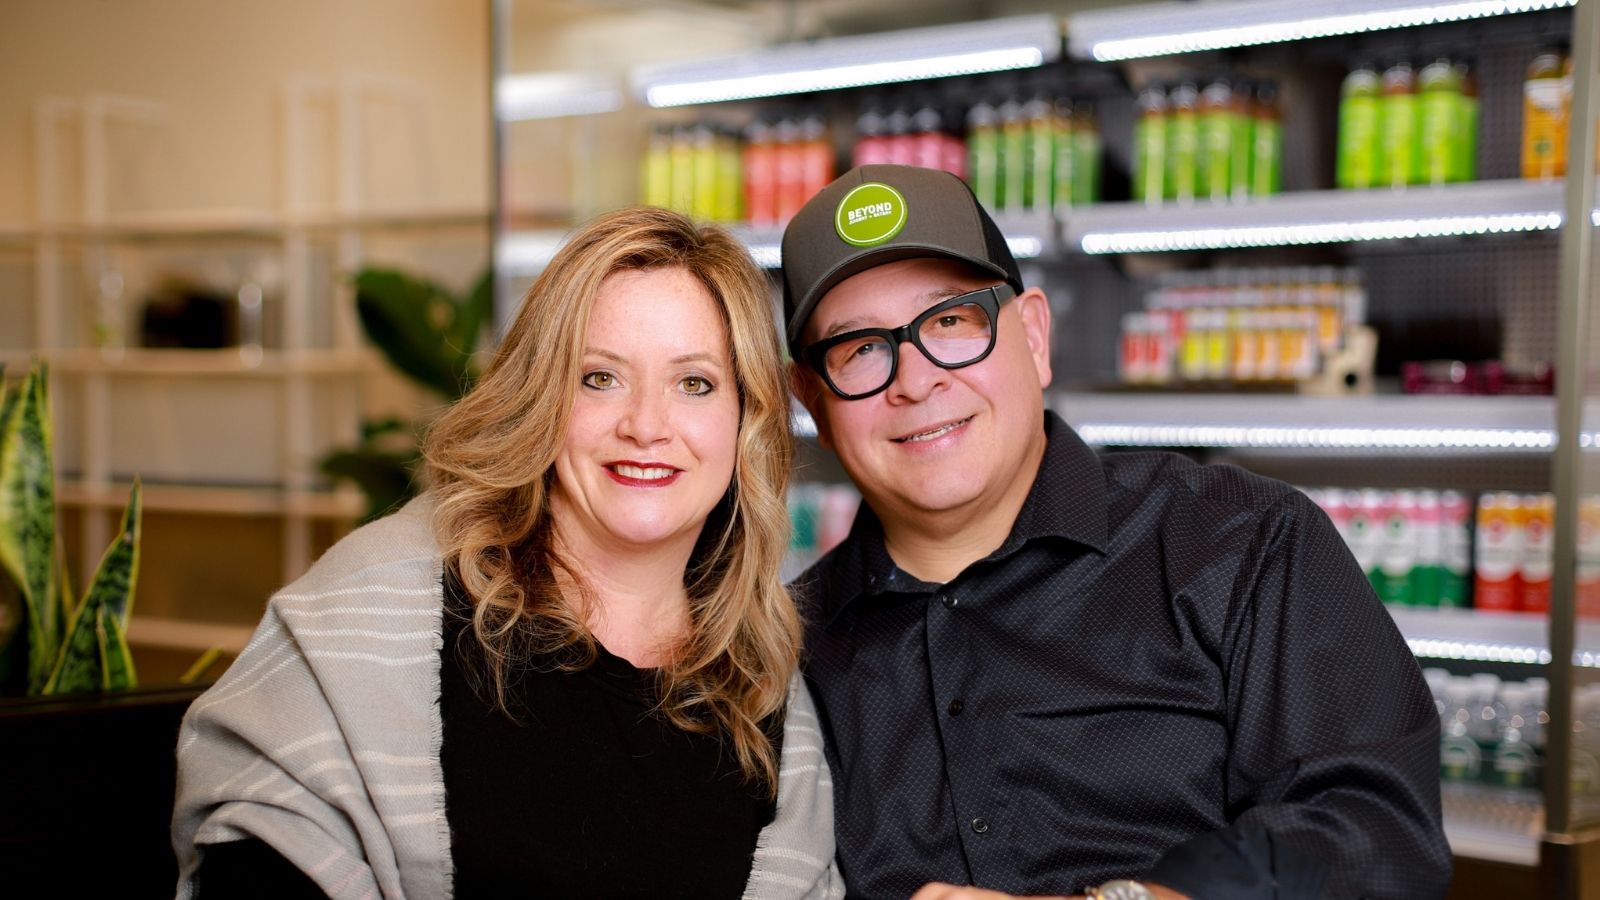 Mijo Alanis and Pam Vivio of Beyond Juicery + Eatery: How To Successfully Ride The Emotional Highs & Lows Of Being An Entrepreneur